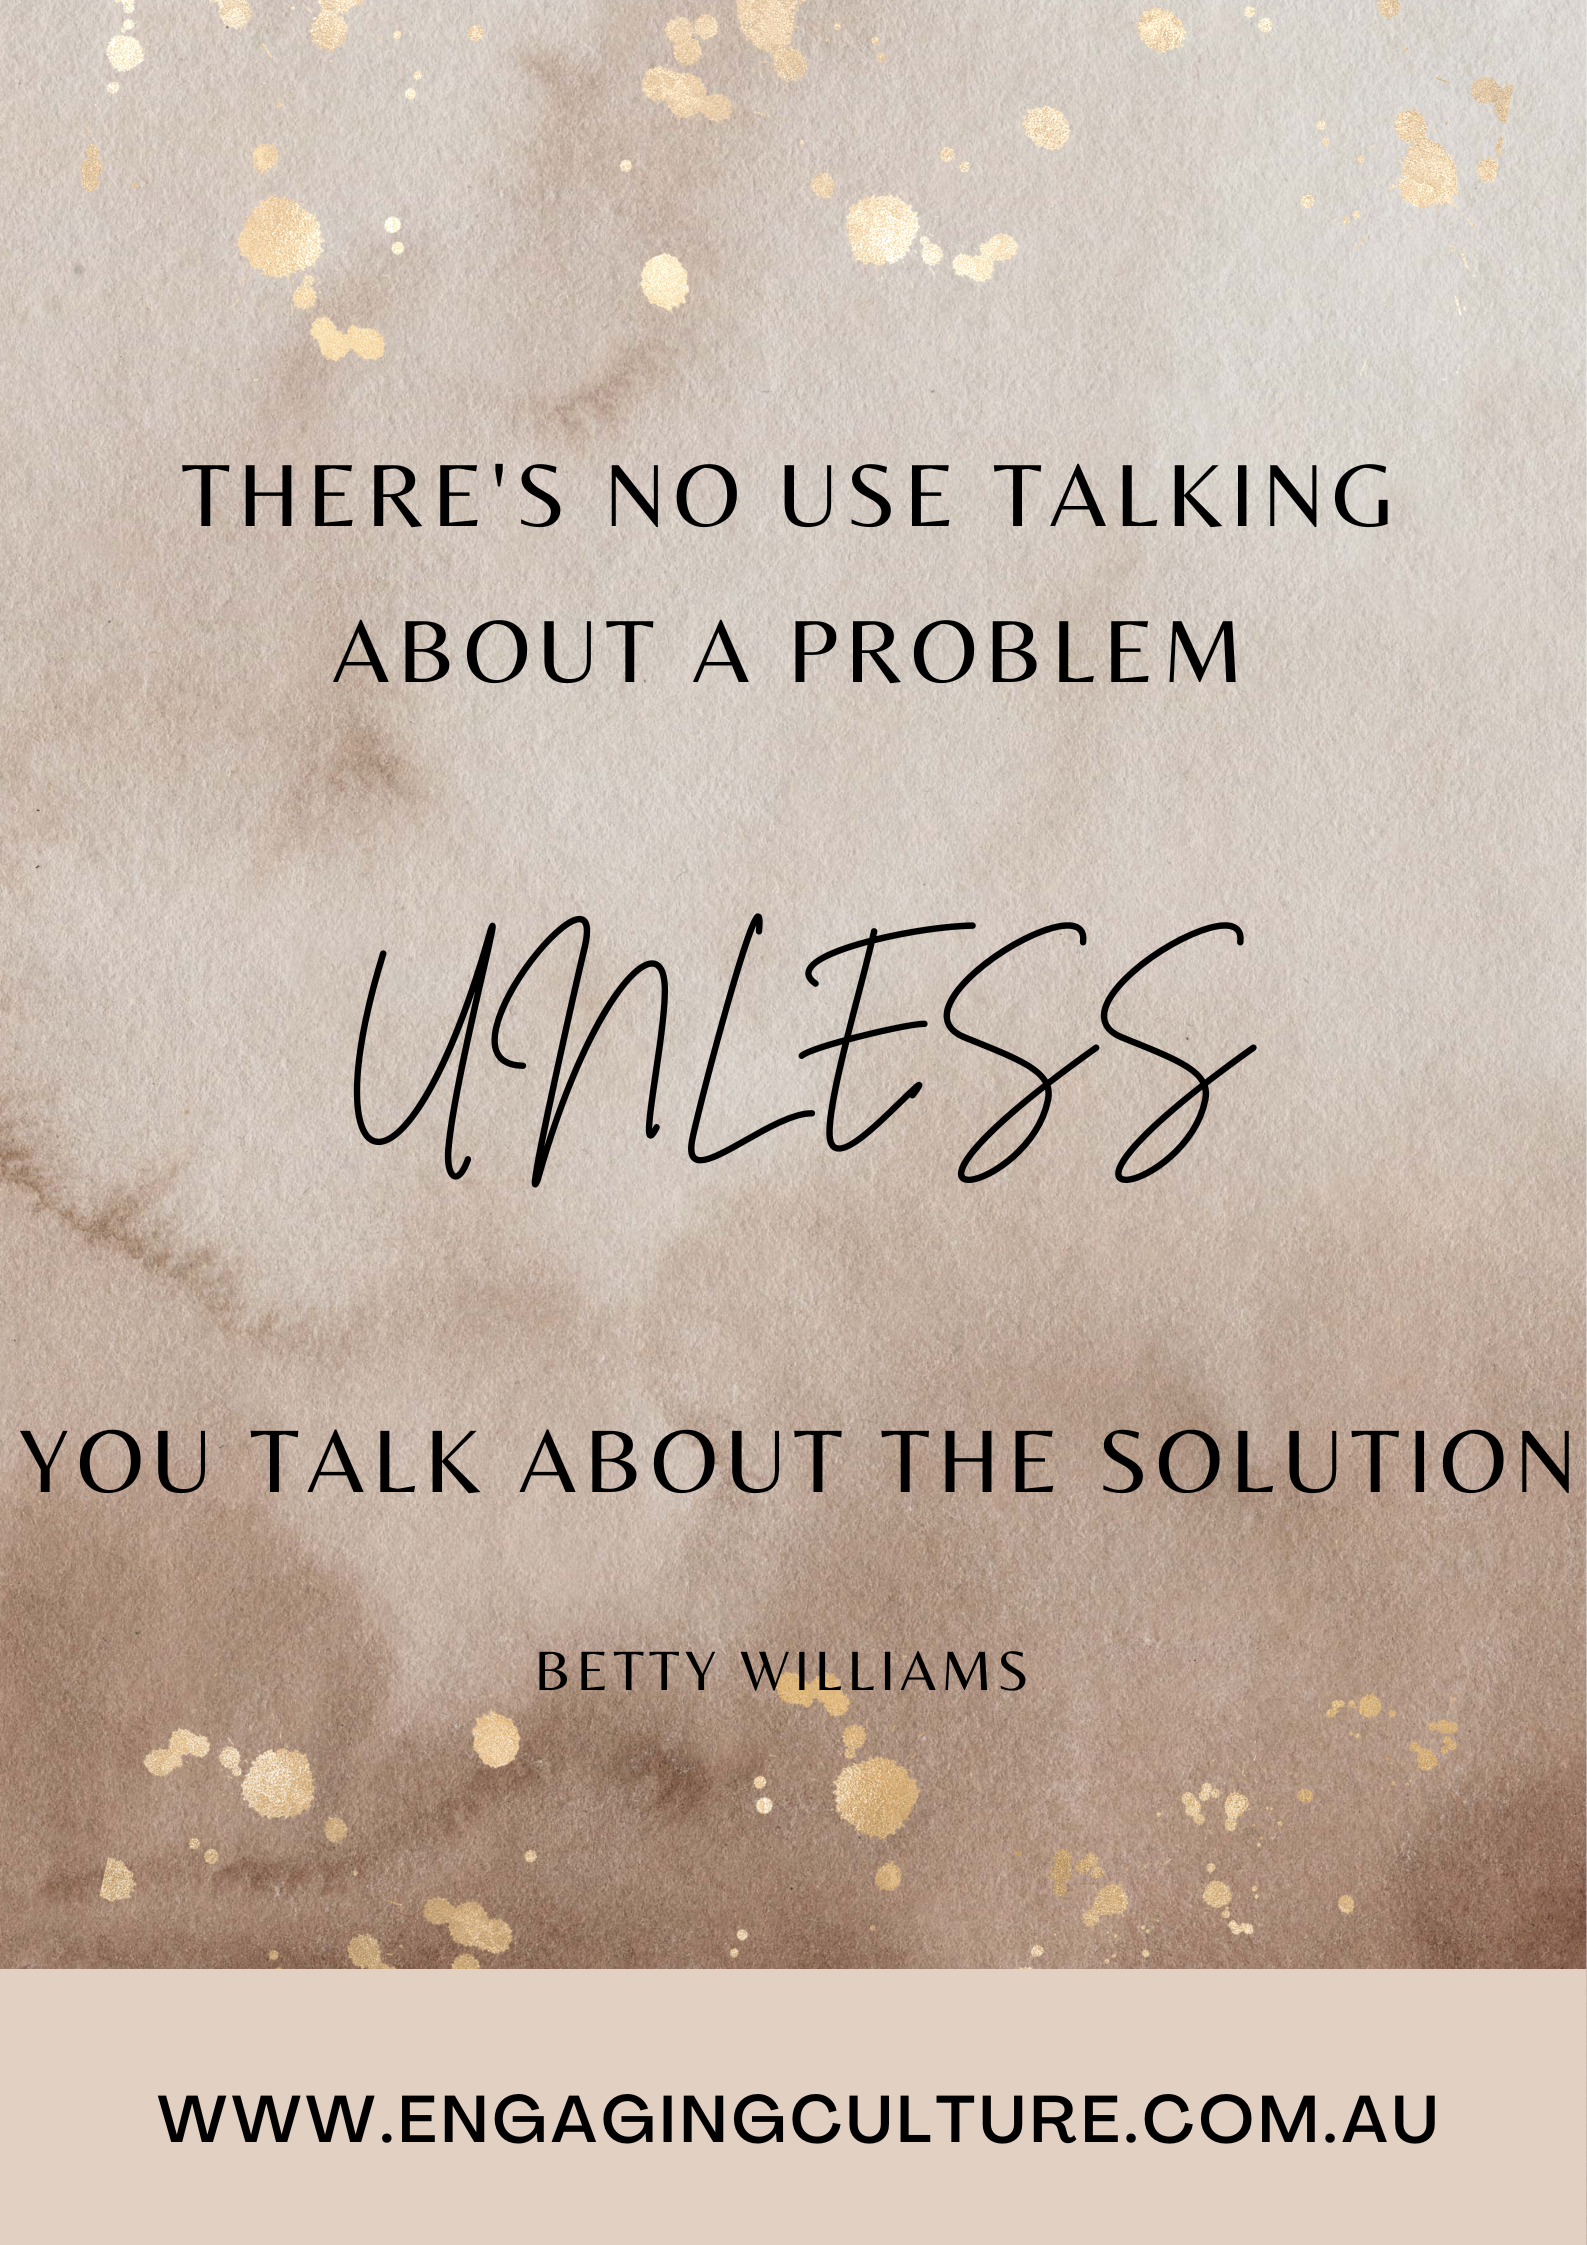 "There's no use talking about a problem unless you talk about the solution" Betty Williams